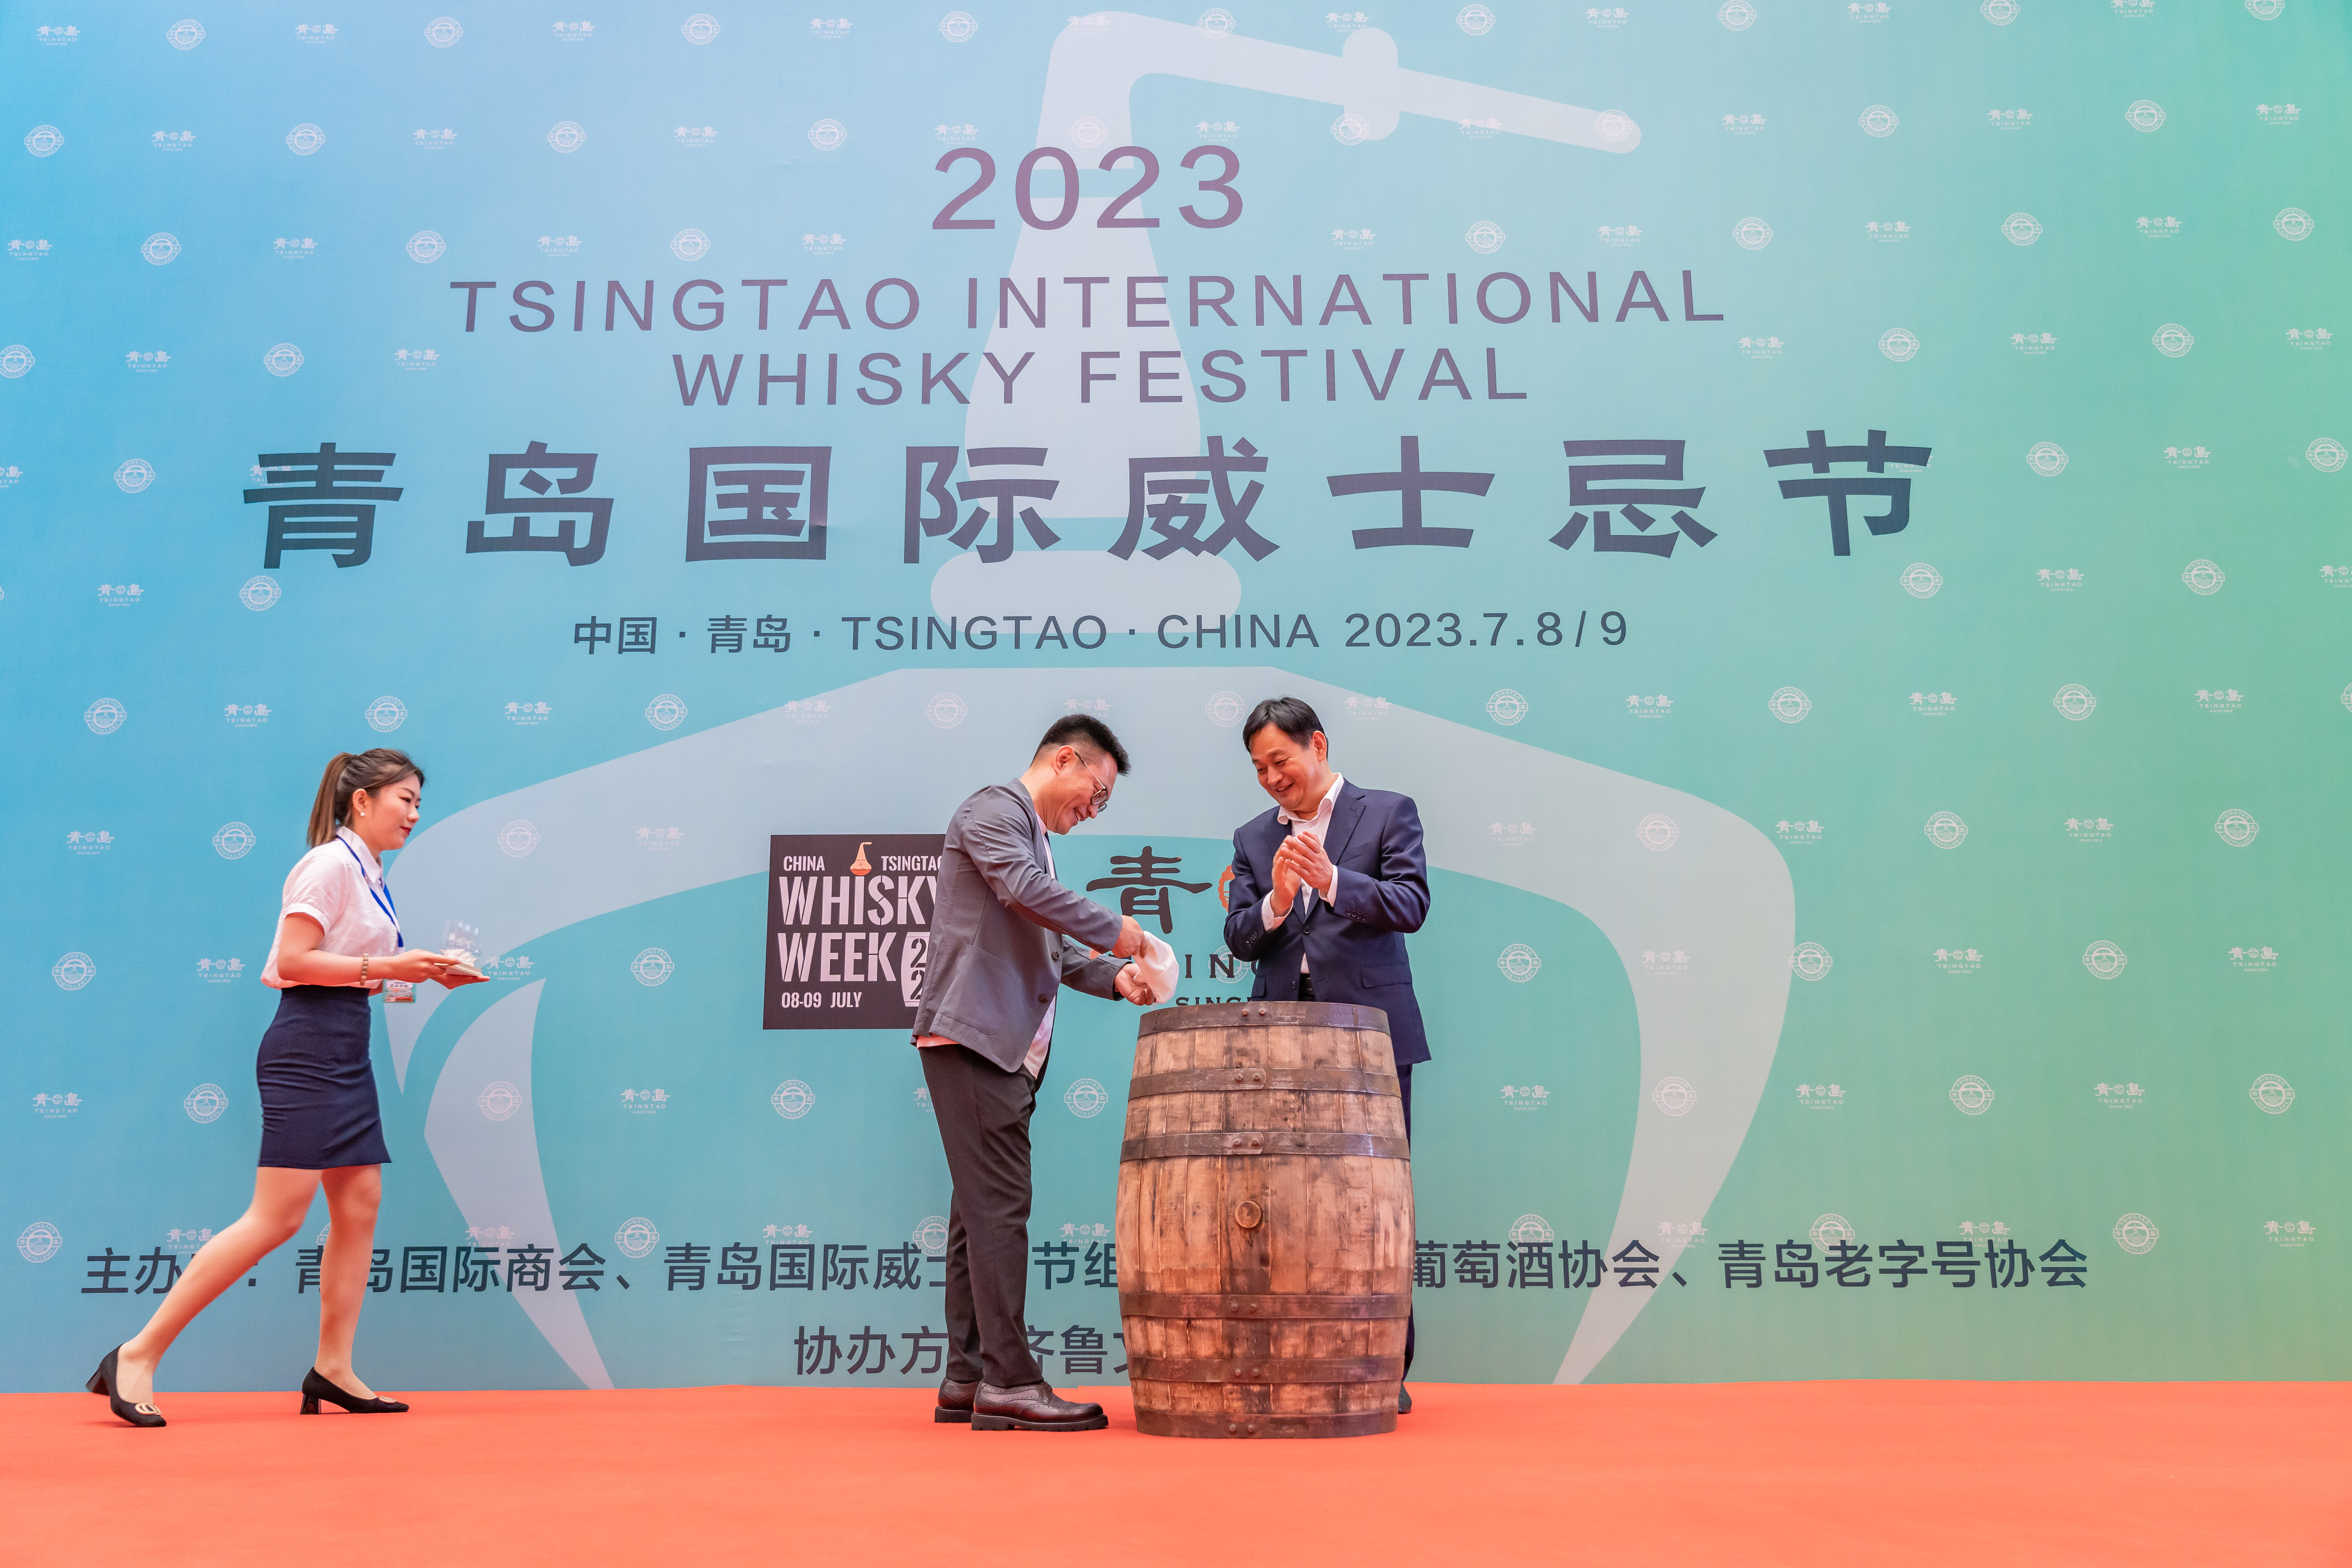 The Qingdao International Whiskey Festival has come to a successful conclusion